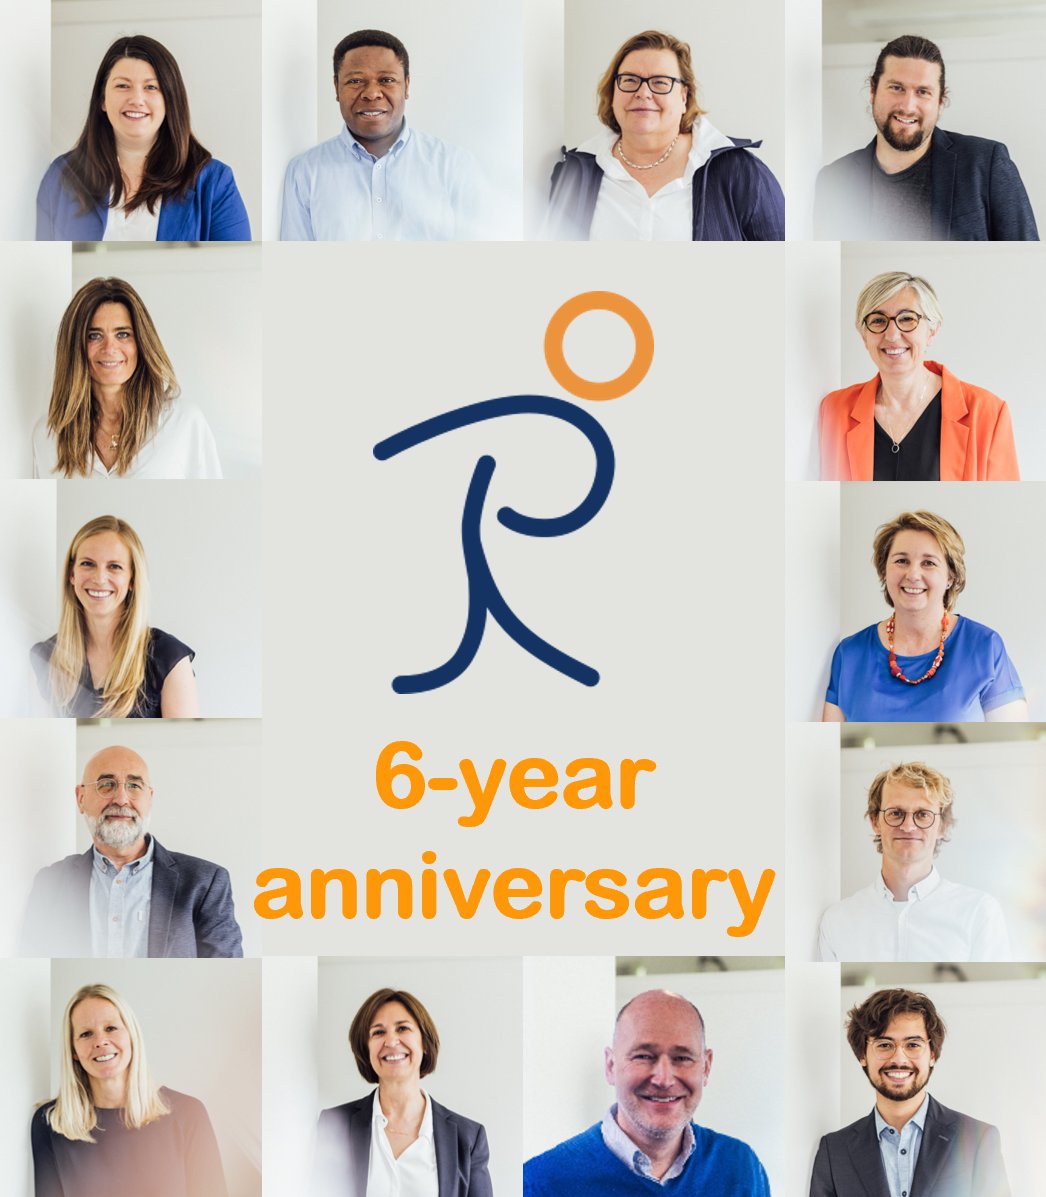 🎉 It's our 6th #anniversary, and what an incredible ride it has been! From #insilico discovery to #clinicalstage, developing our #drugdiscovery platforms and a robust #pipeline, thank you all for being a part of our story. Together we are shaping the future of healthy #aging! 🙏